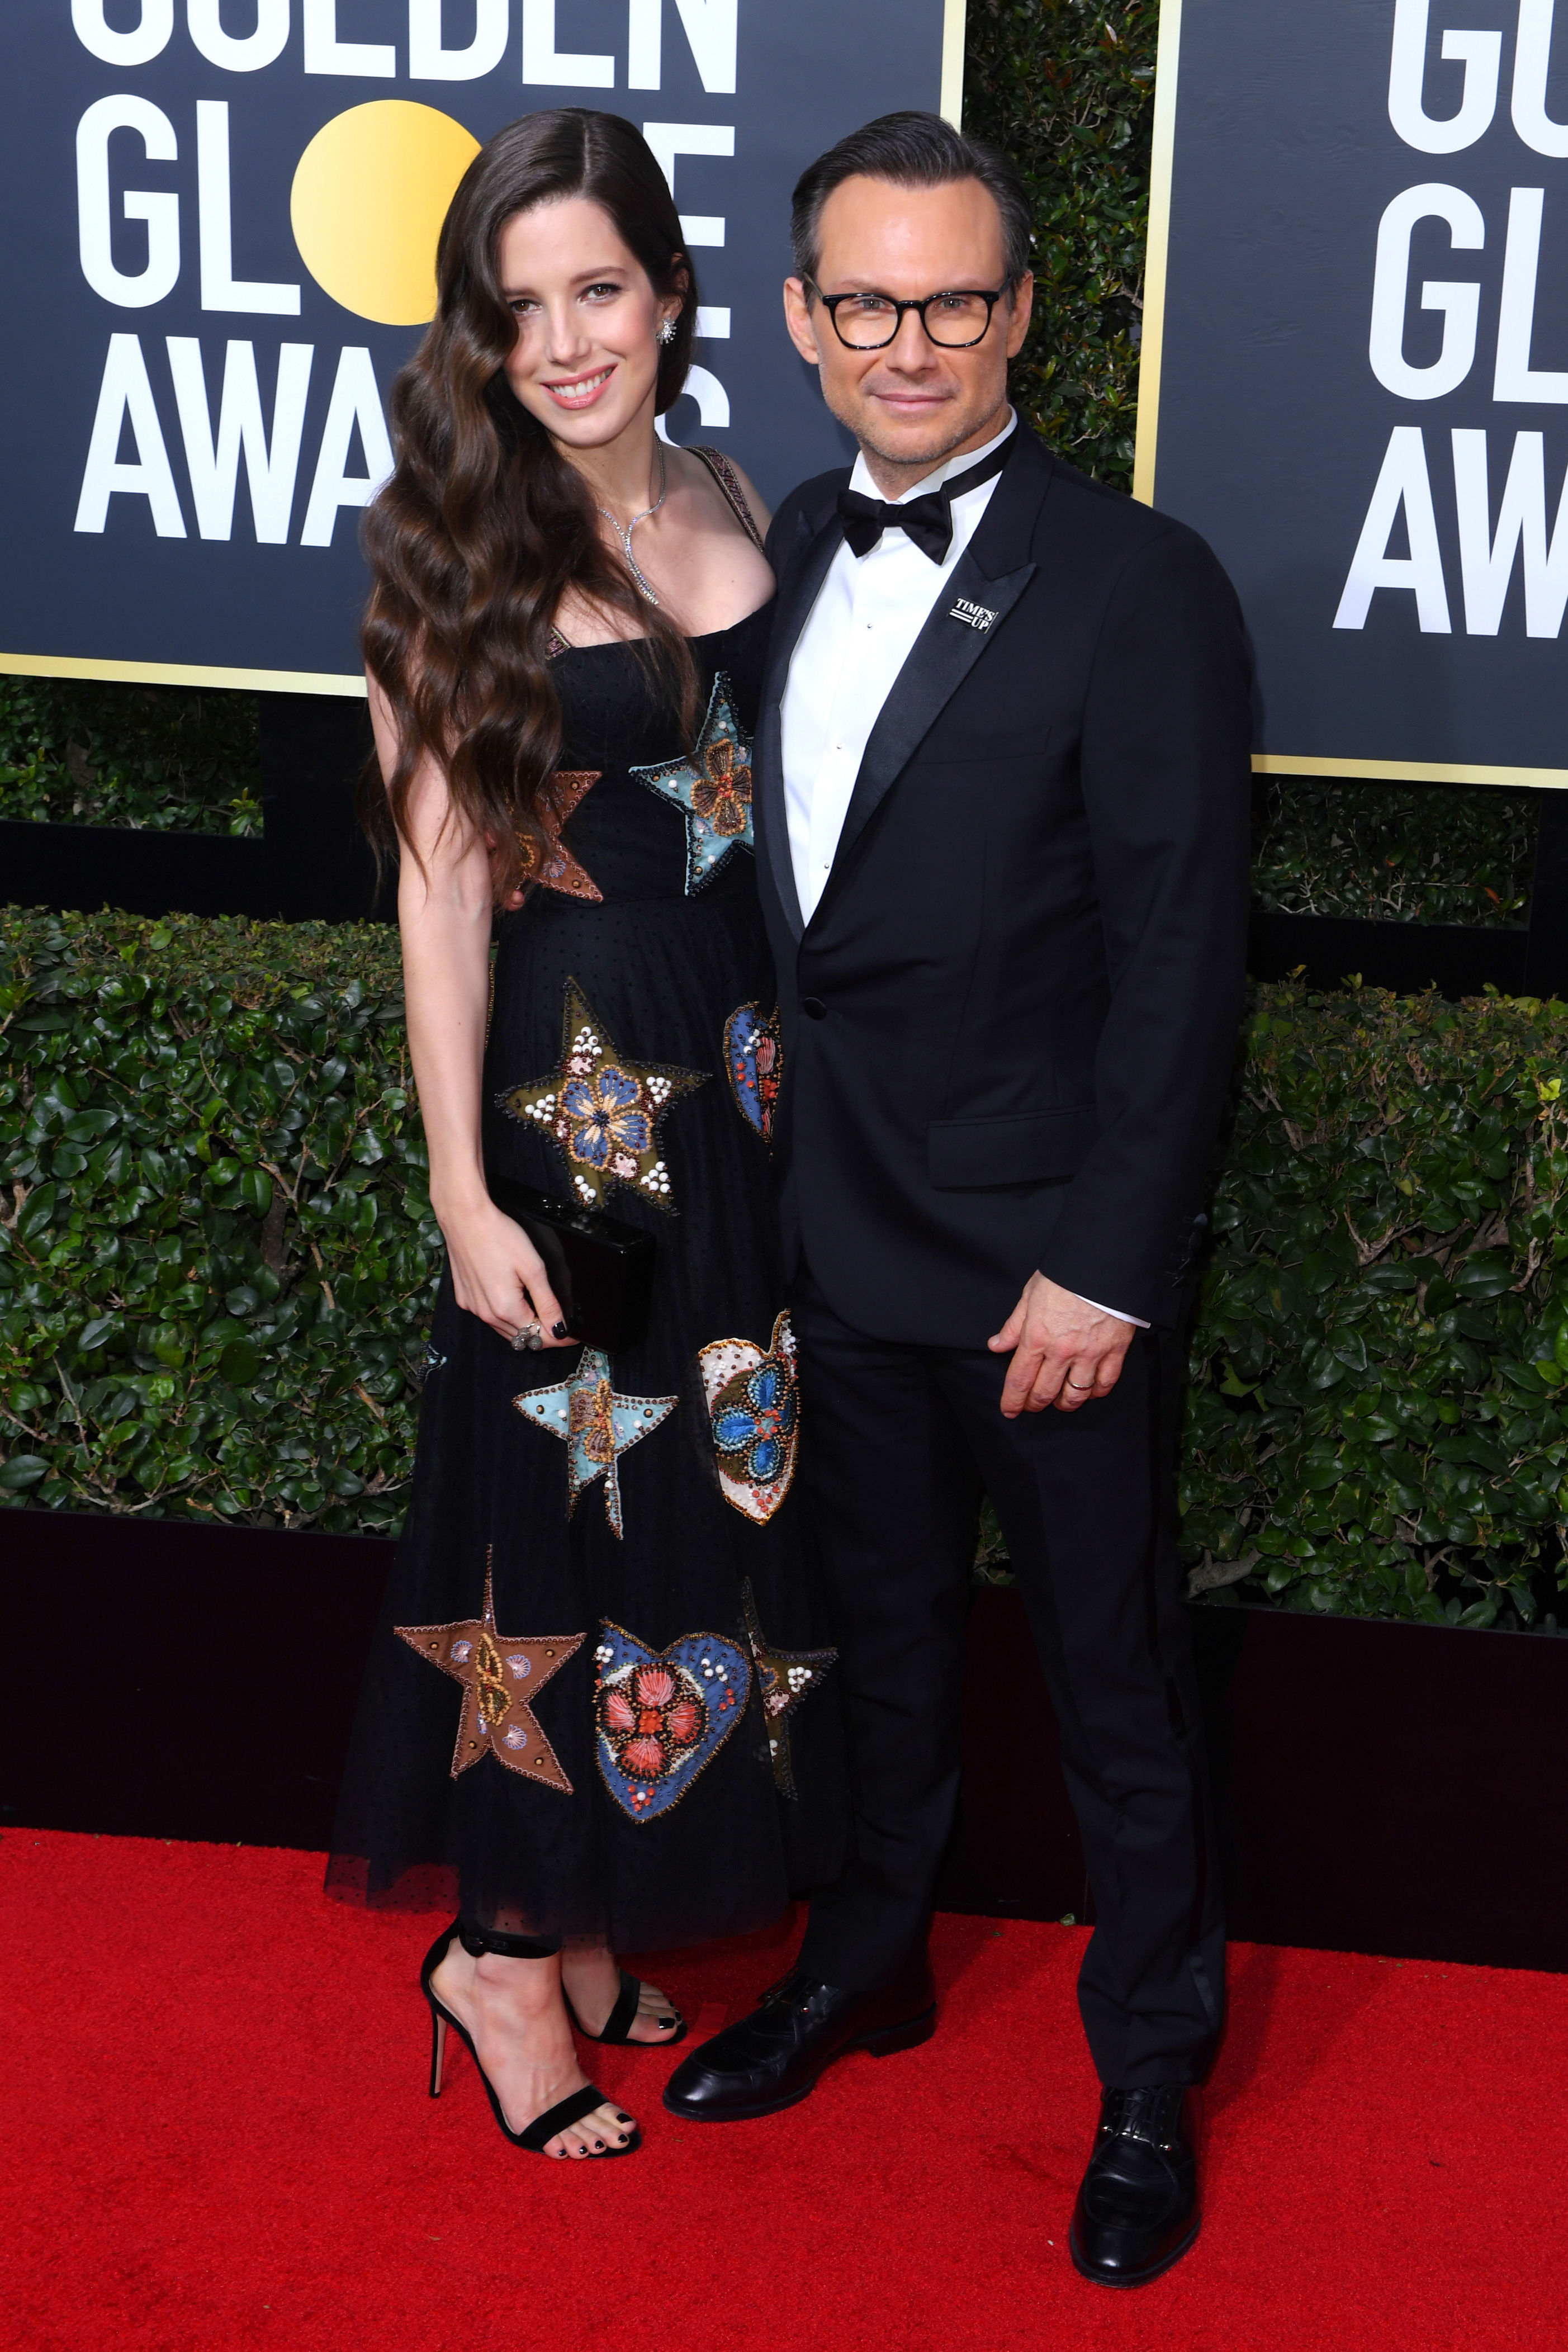 <p>Golden Globe-winning "Mr. Robot" actor Christian Slater is 18 years older than second wife Brittany Lopez. In 2013, the couple married at a Miami courthouse after three years of dating. Christian was 44 and Brittany was in her mid-20s.</p>